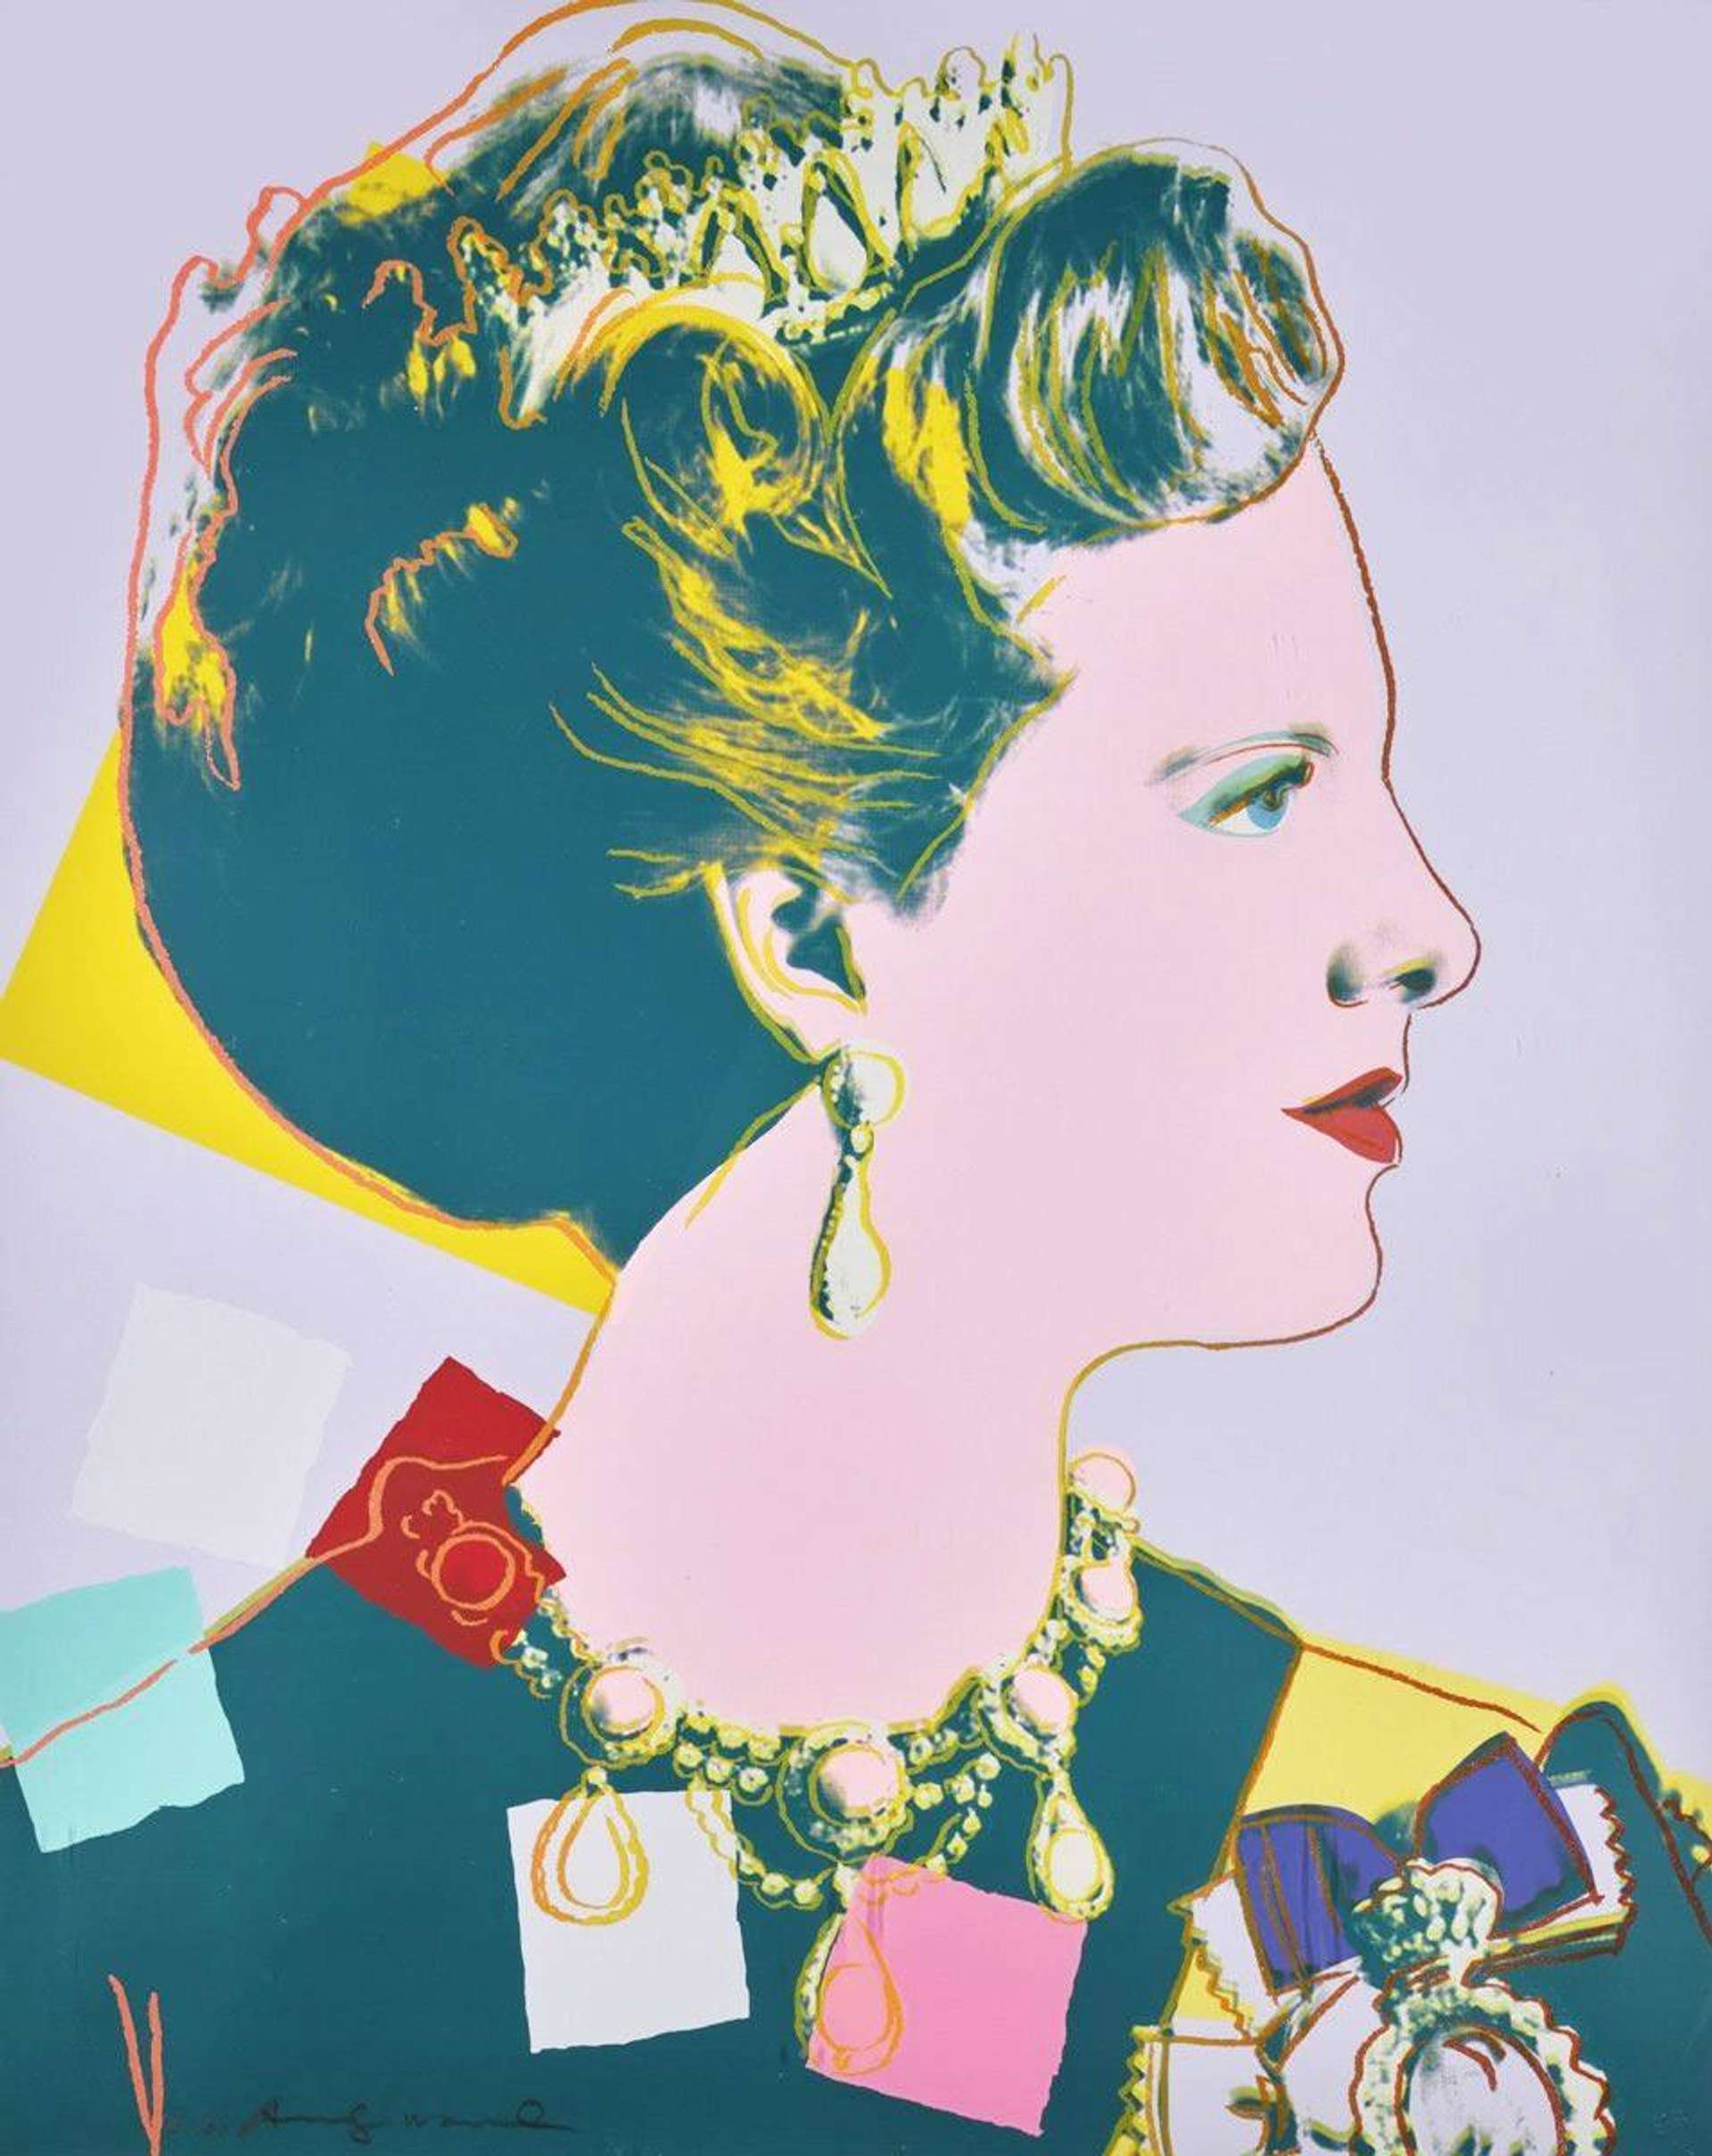 Queen Margrethe Of Denmark Royal Edition (F. & S. II.342A) by Andy Warhol